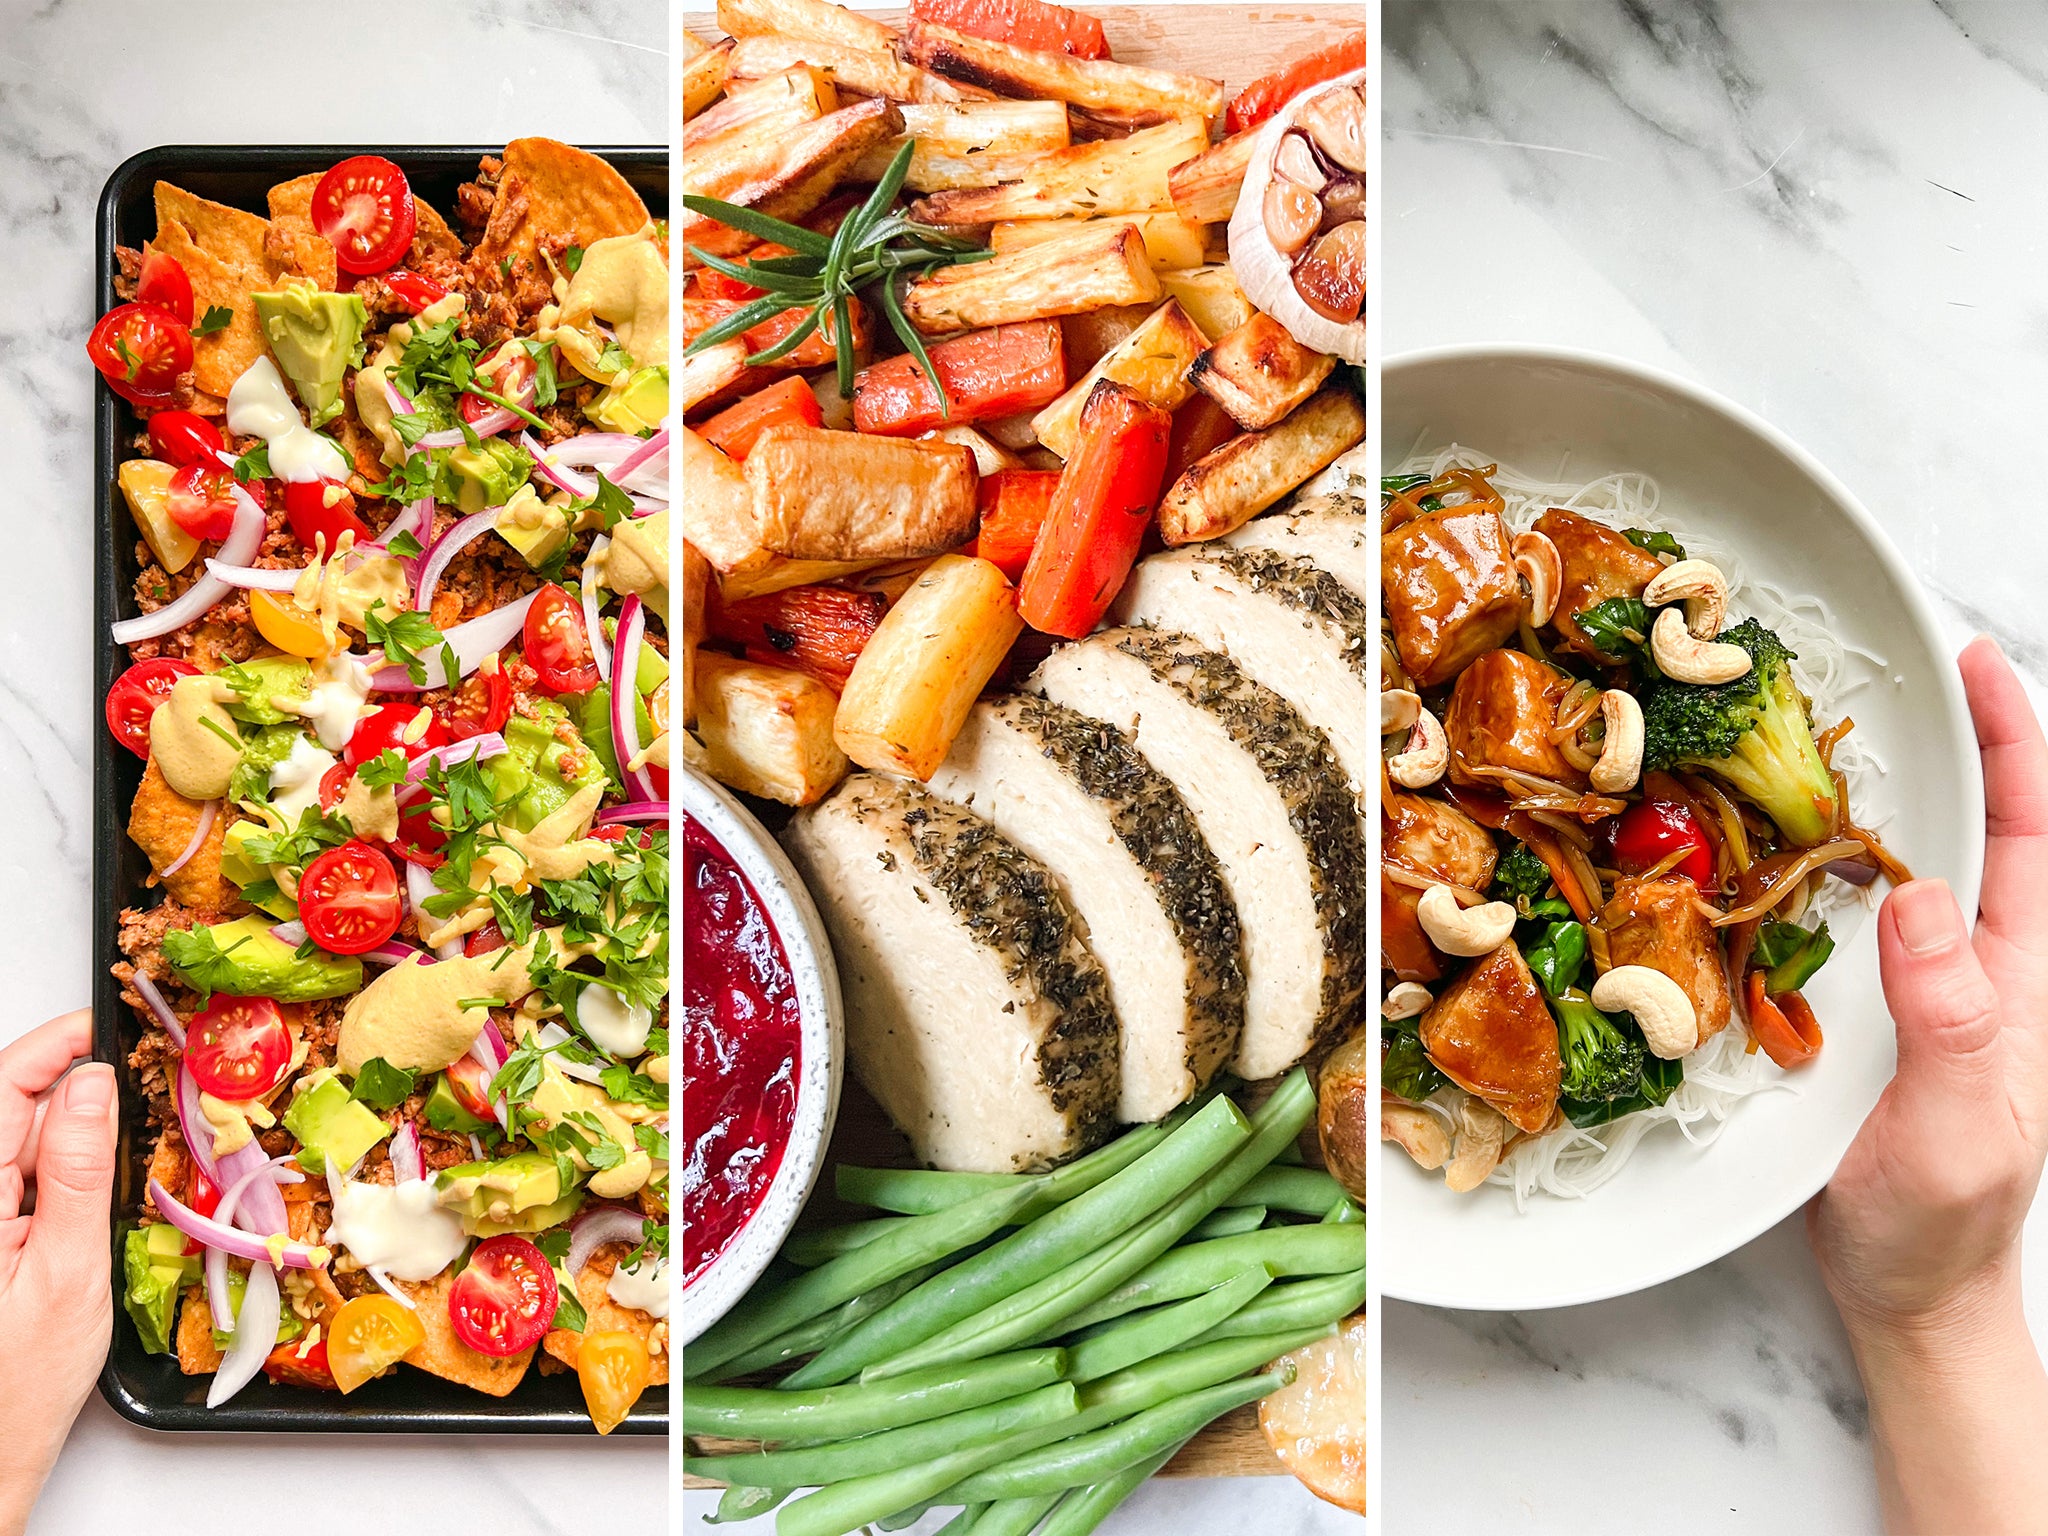 Get cooking this weekend with these plant-based recipes